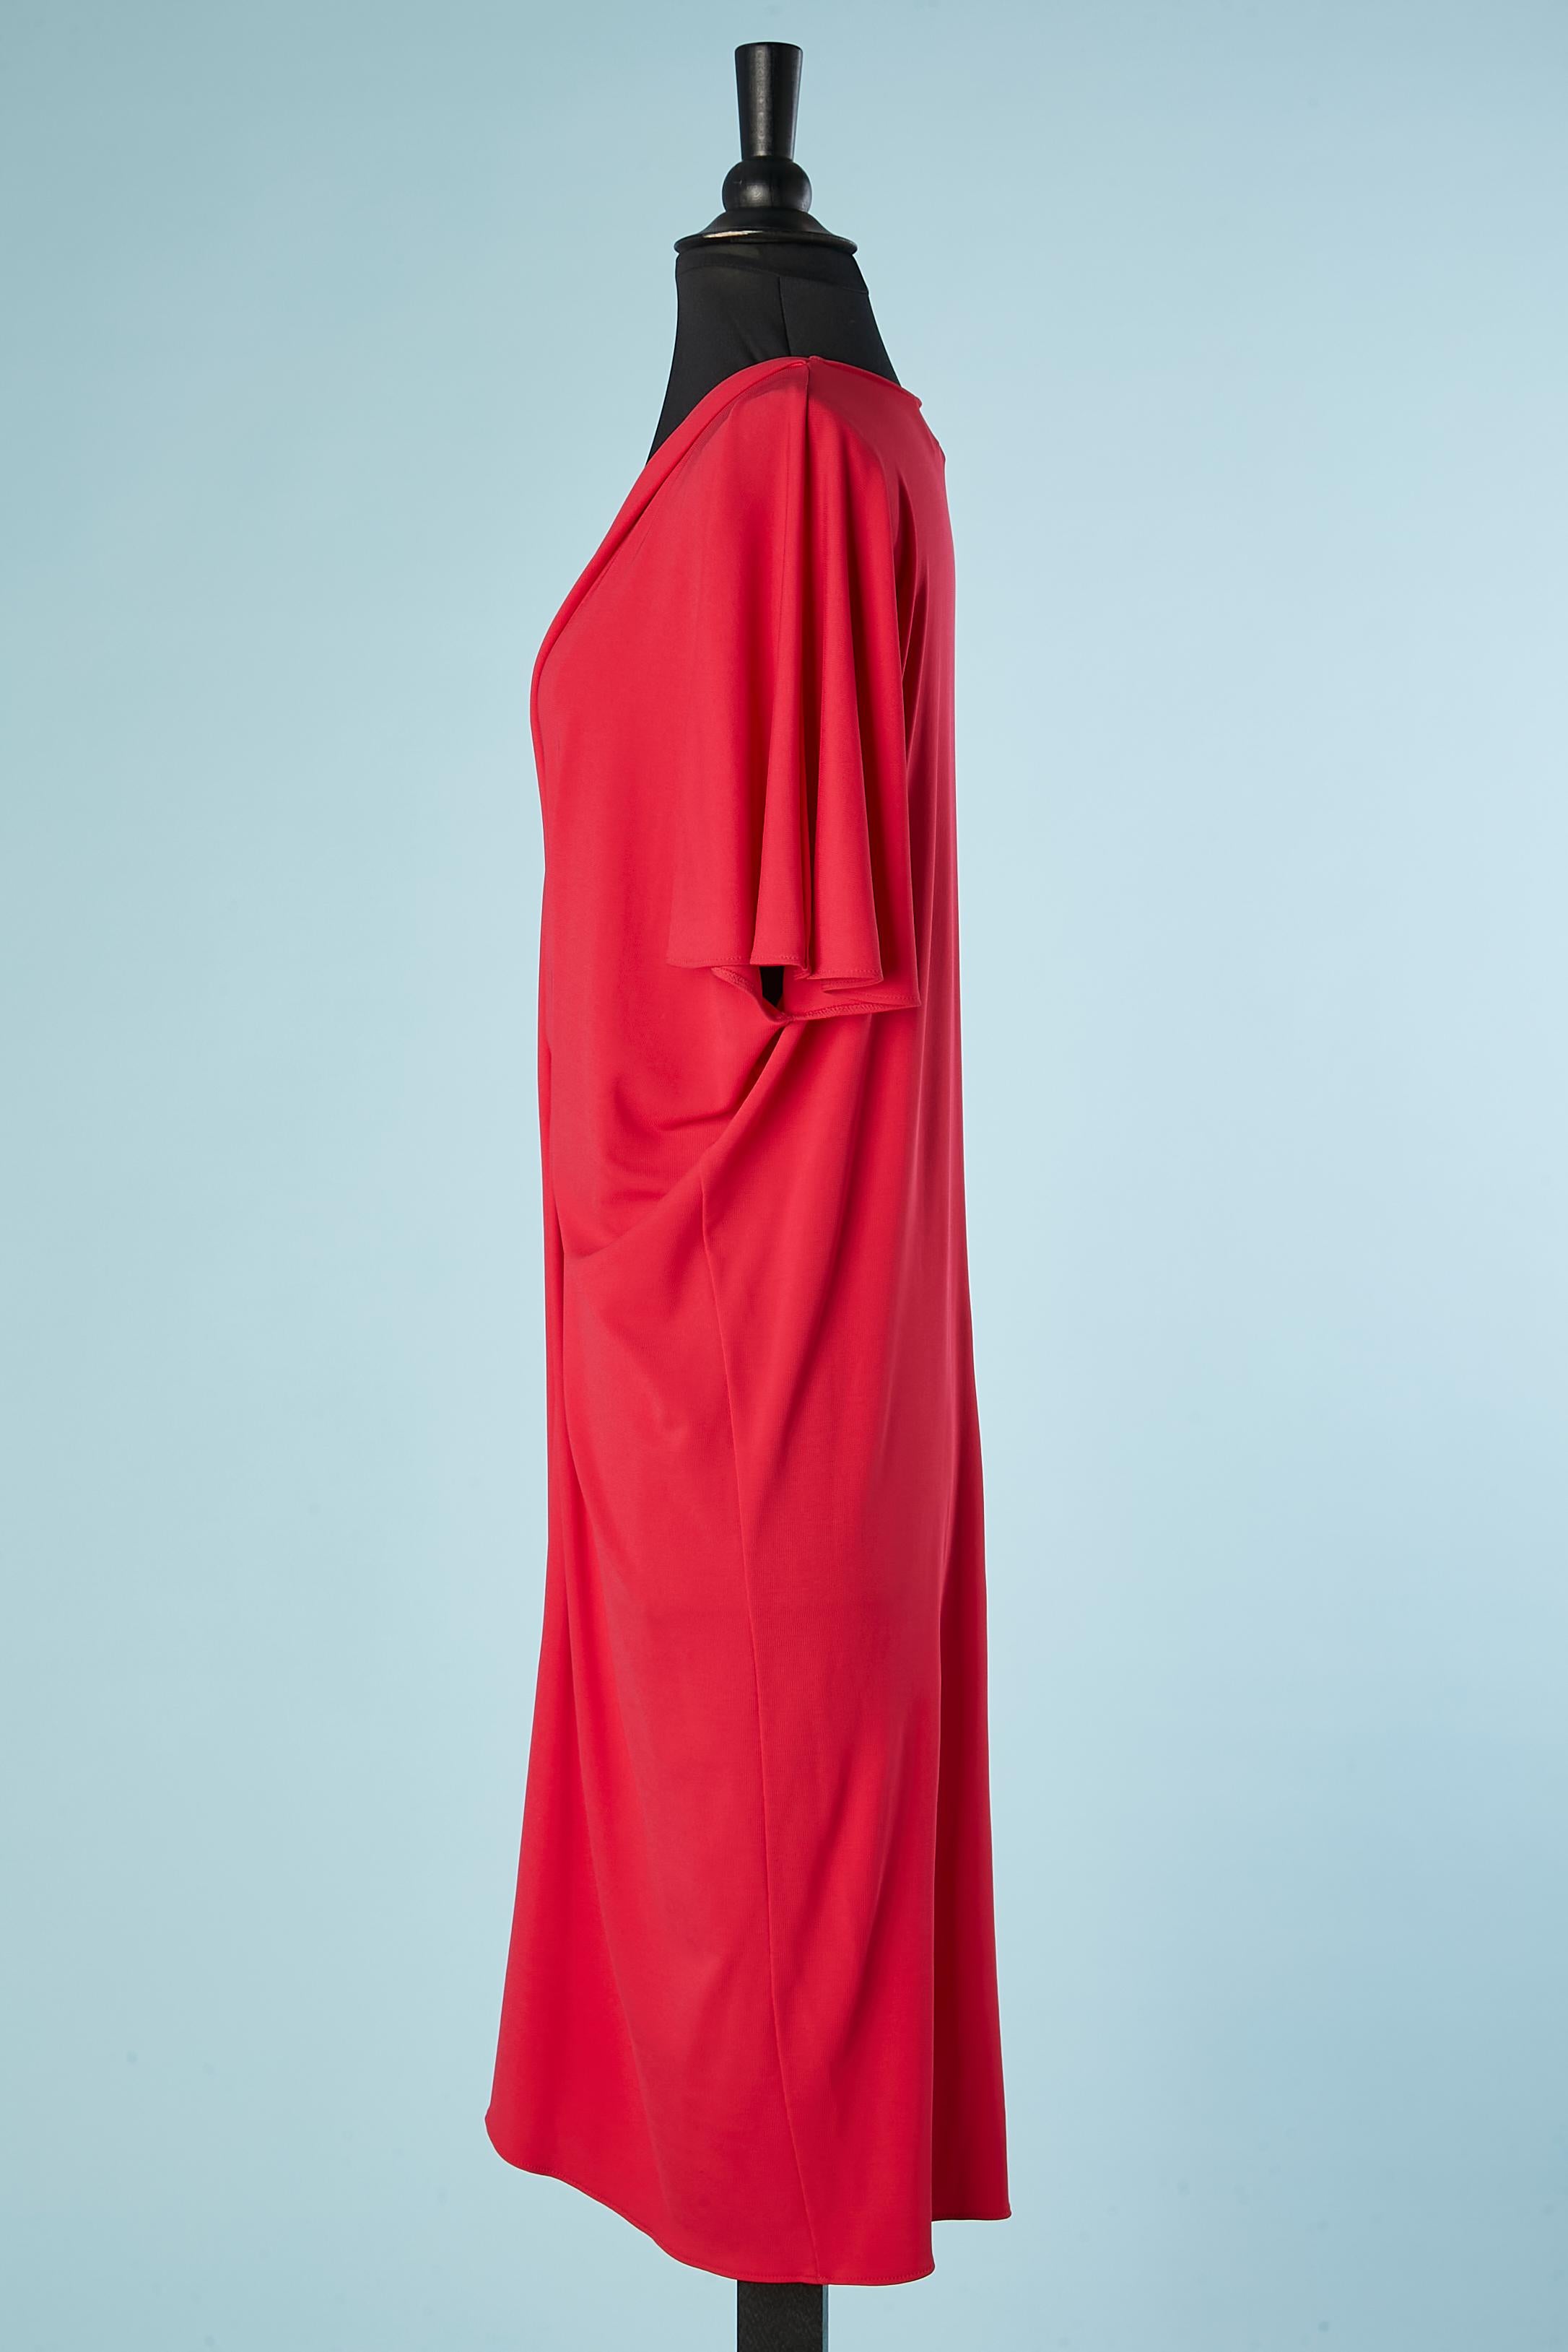 Red jersey cocktail dress draped in the front Lanvin par Alber Elbaz FW 2015 For Sale 1